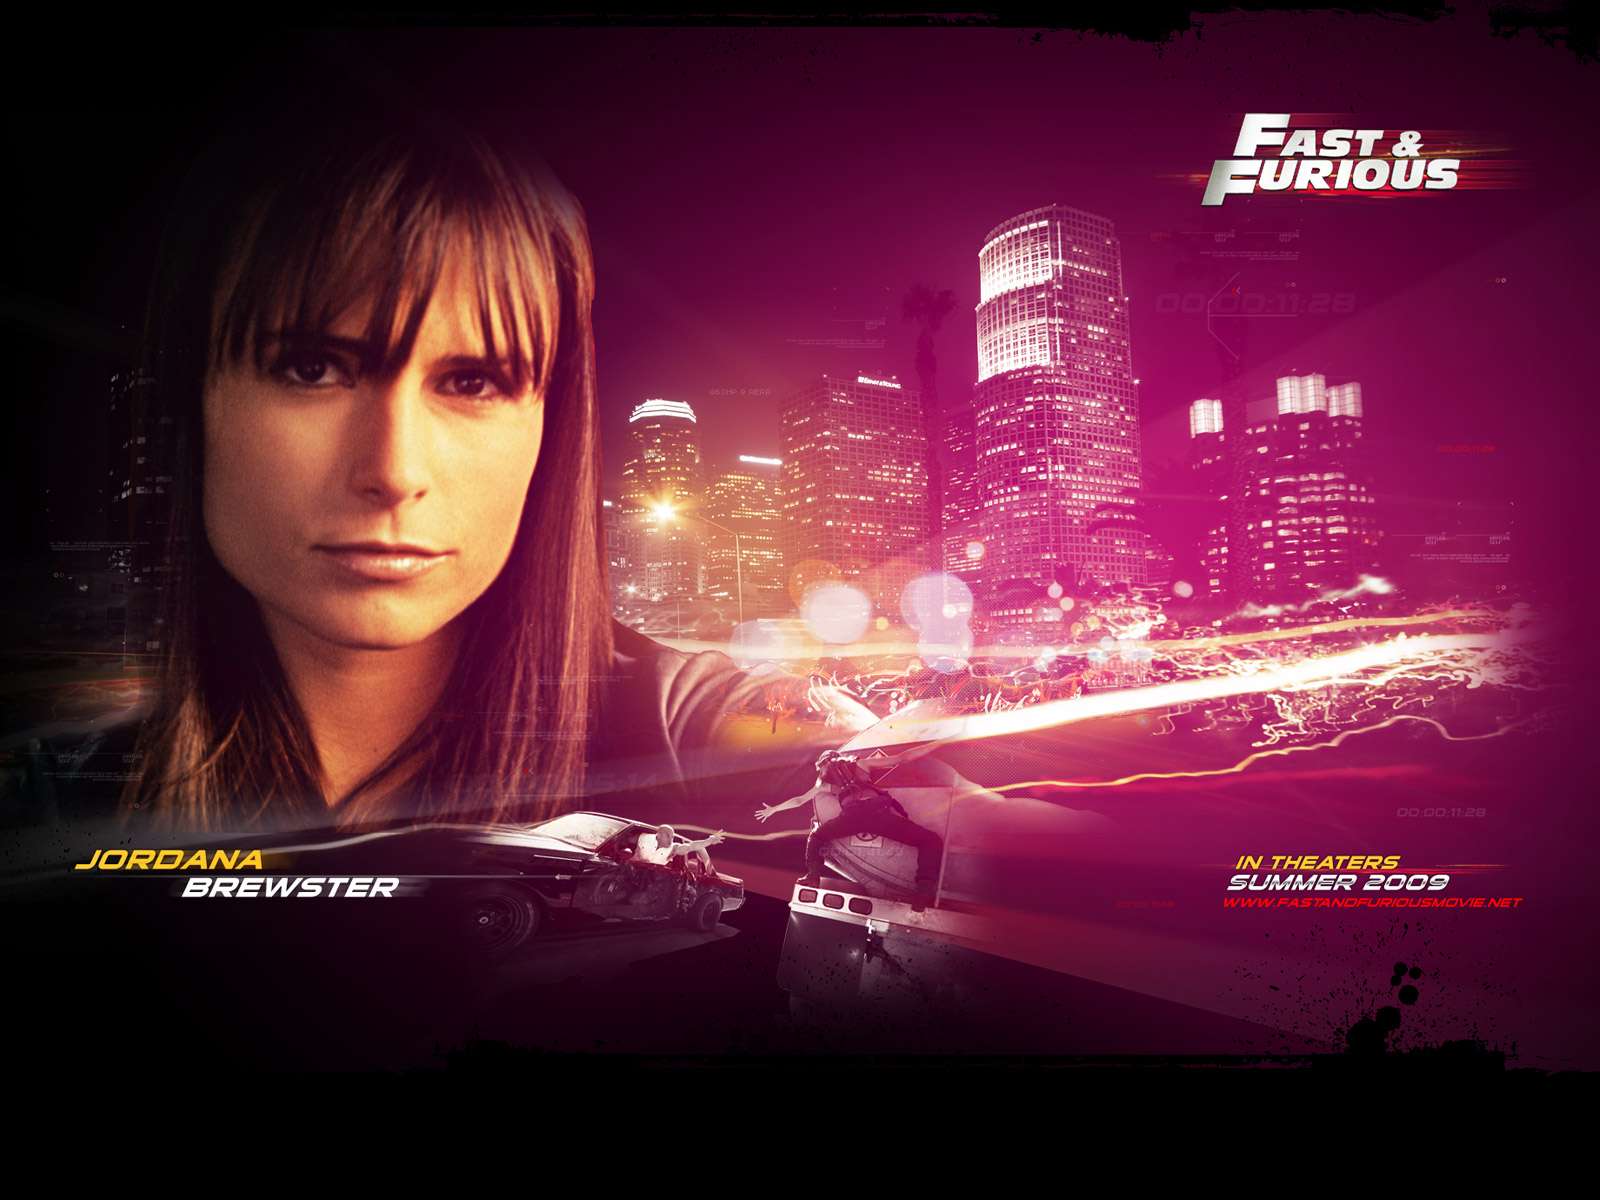 Wallpaper Fast & Furious The Fast and the Furious Movies